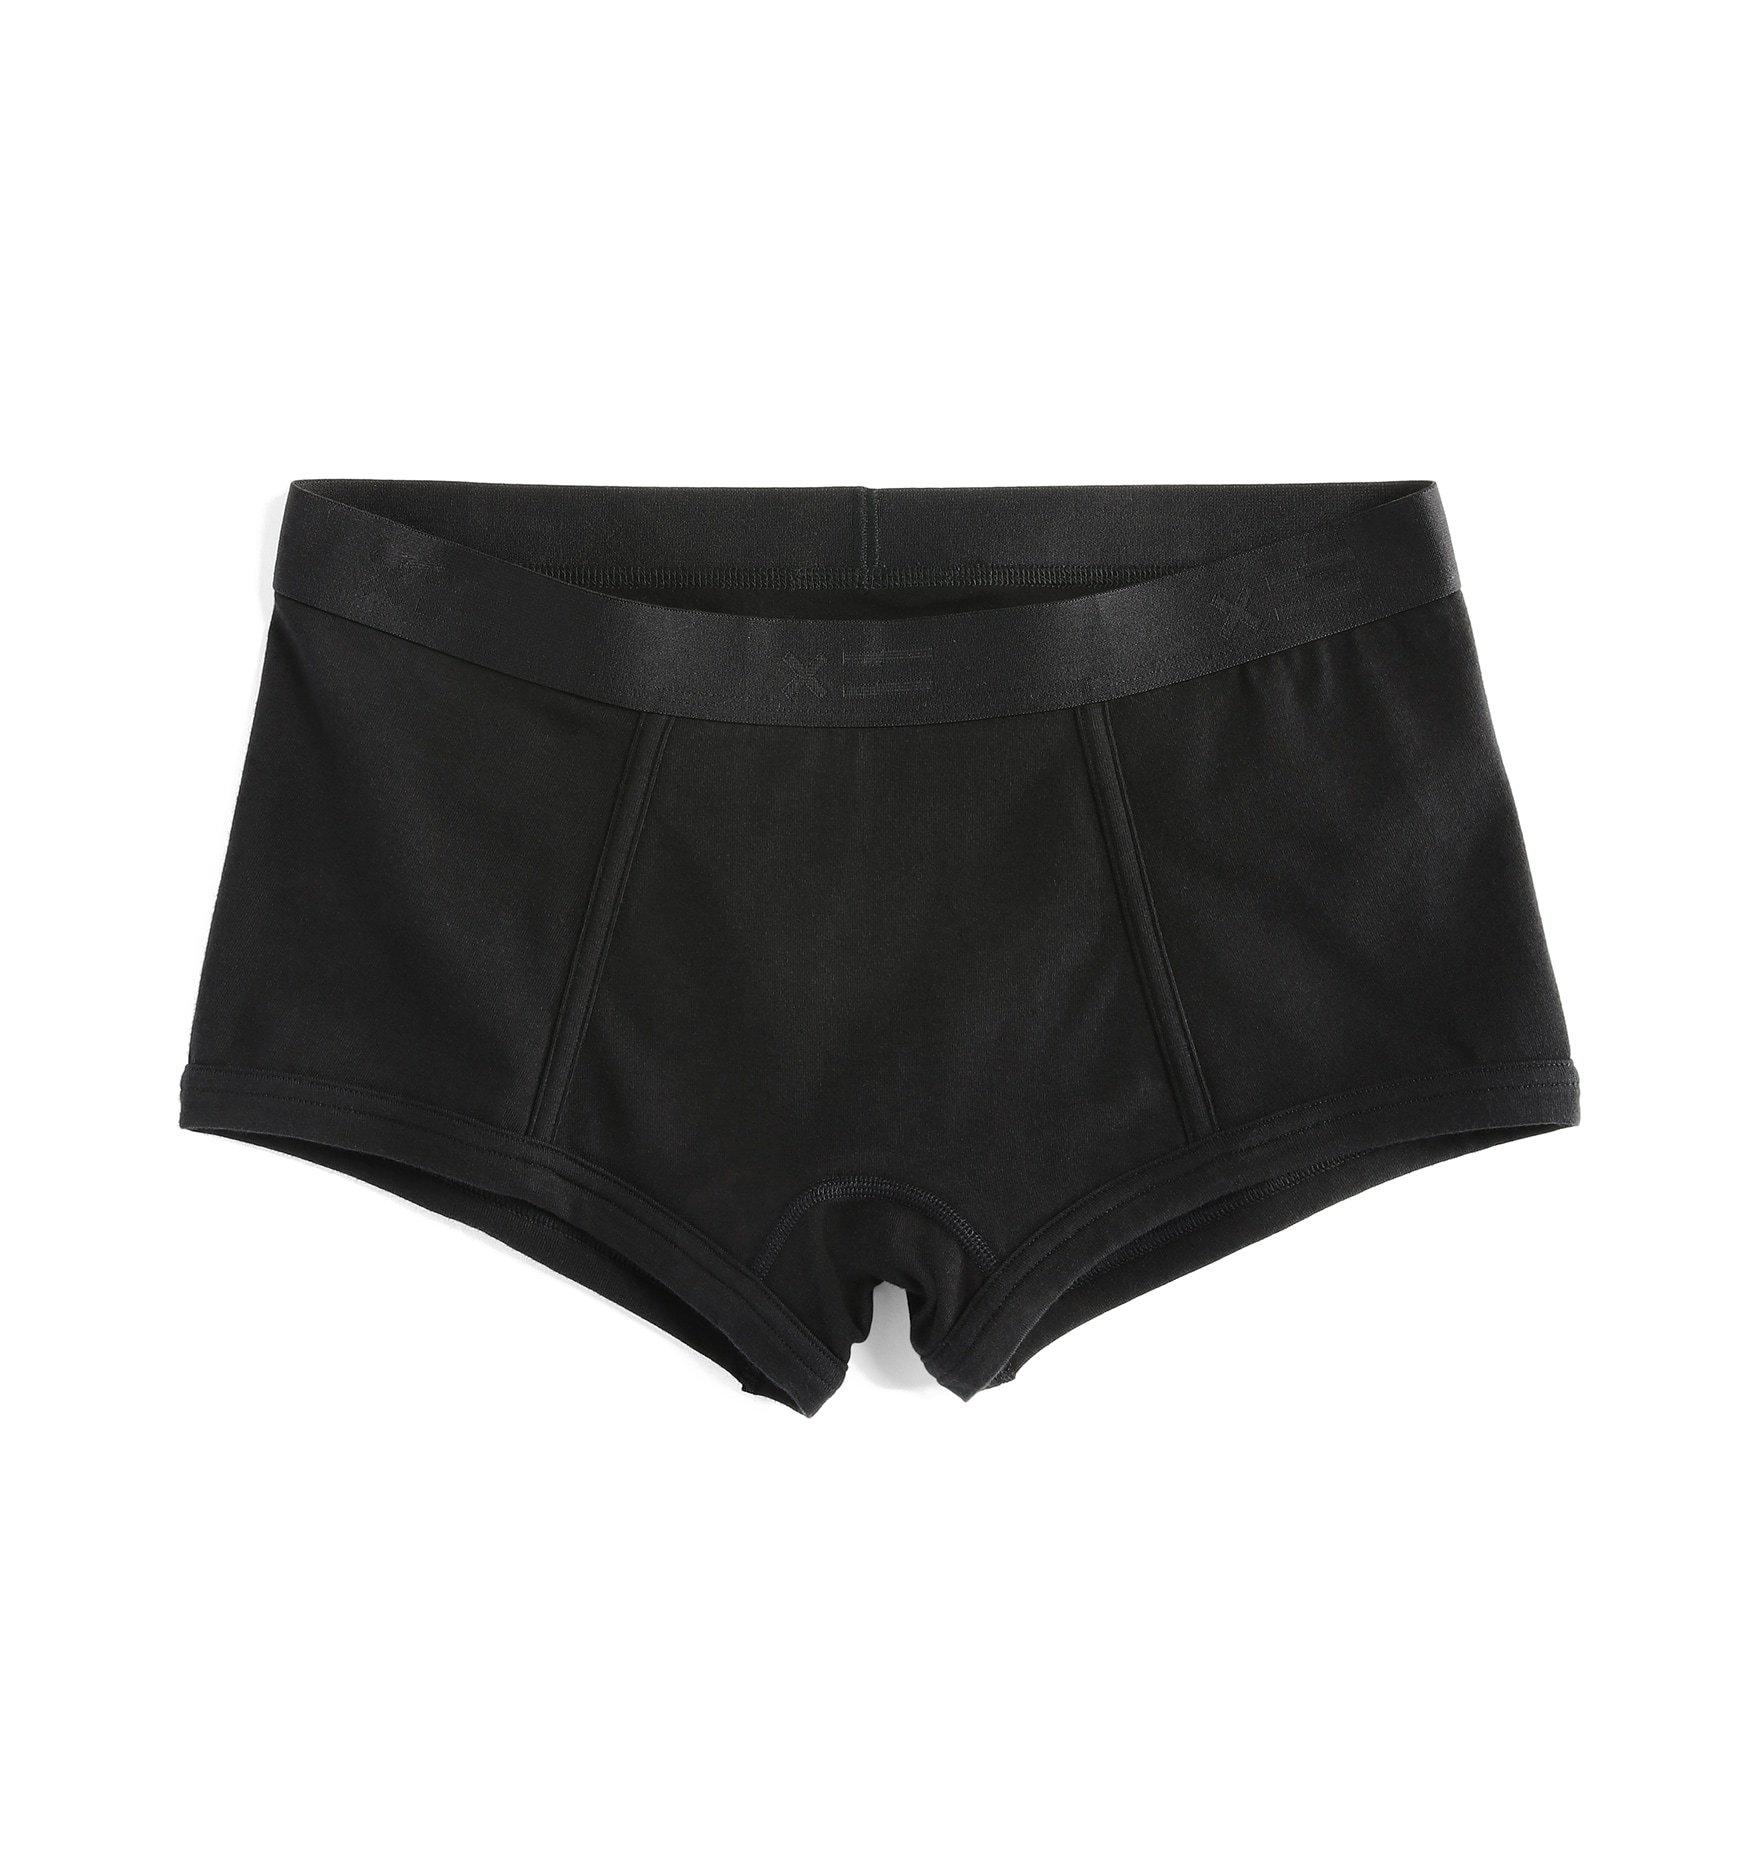 TOMBOYX First Line Stretch Cotton Period 4.5-inch Trunks - Black